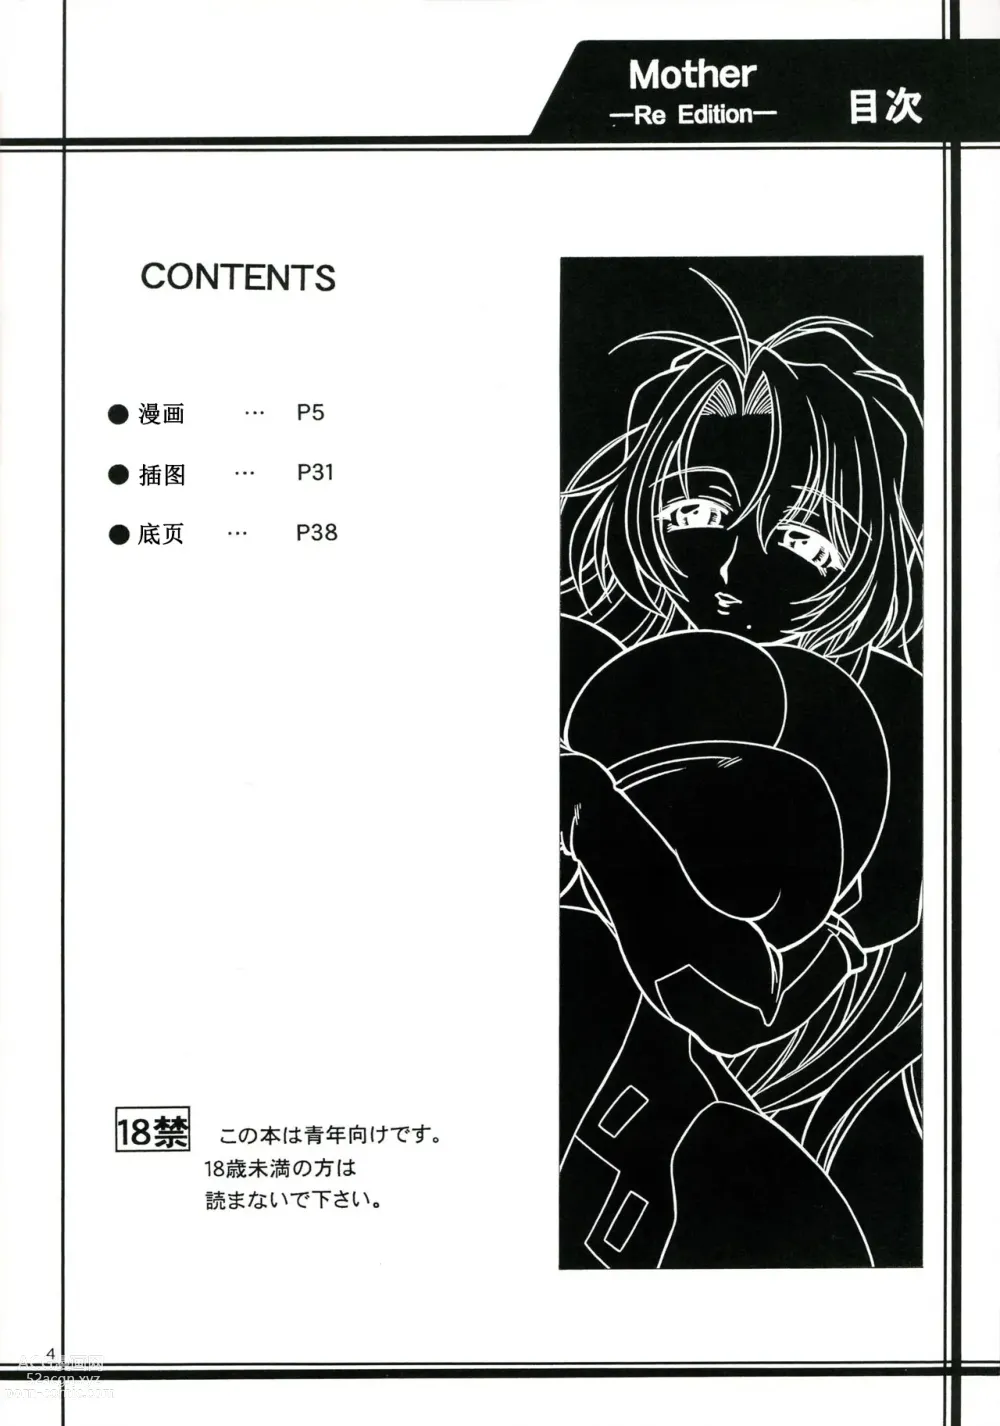 Page 3 of doujinshi Mother -Re Edition-